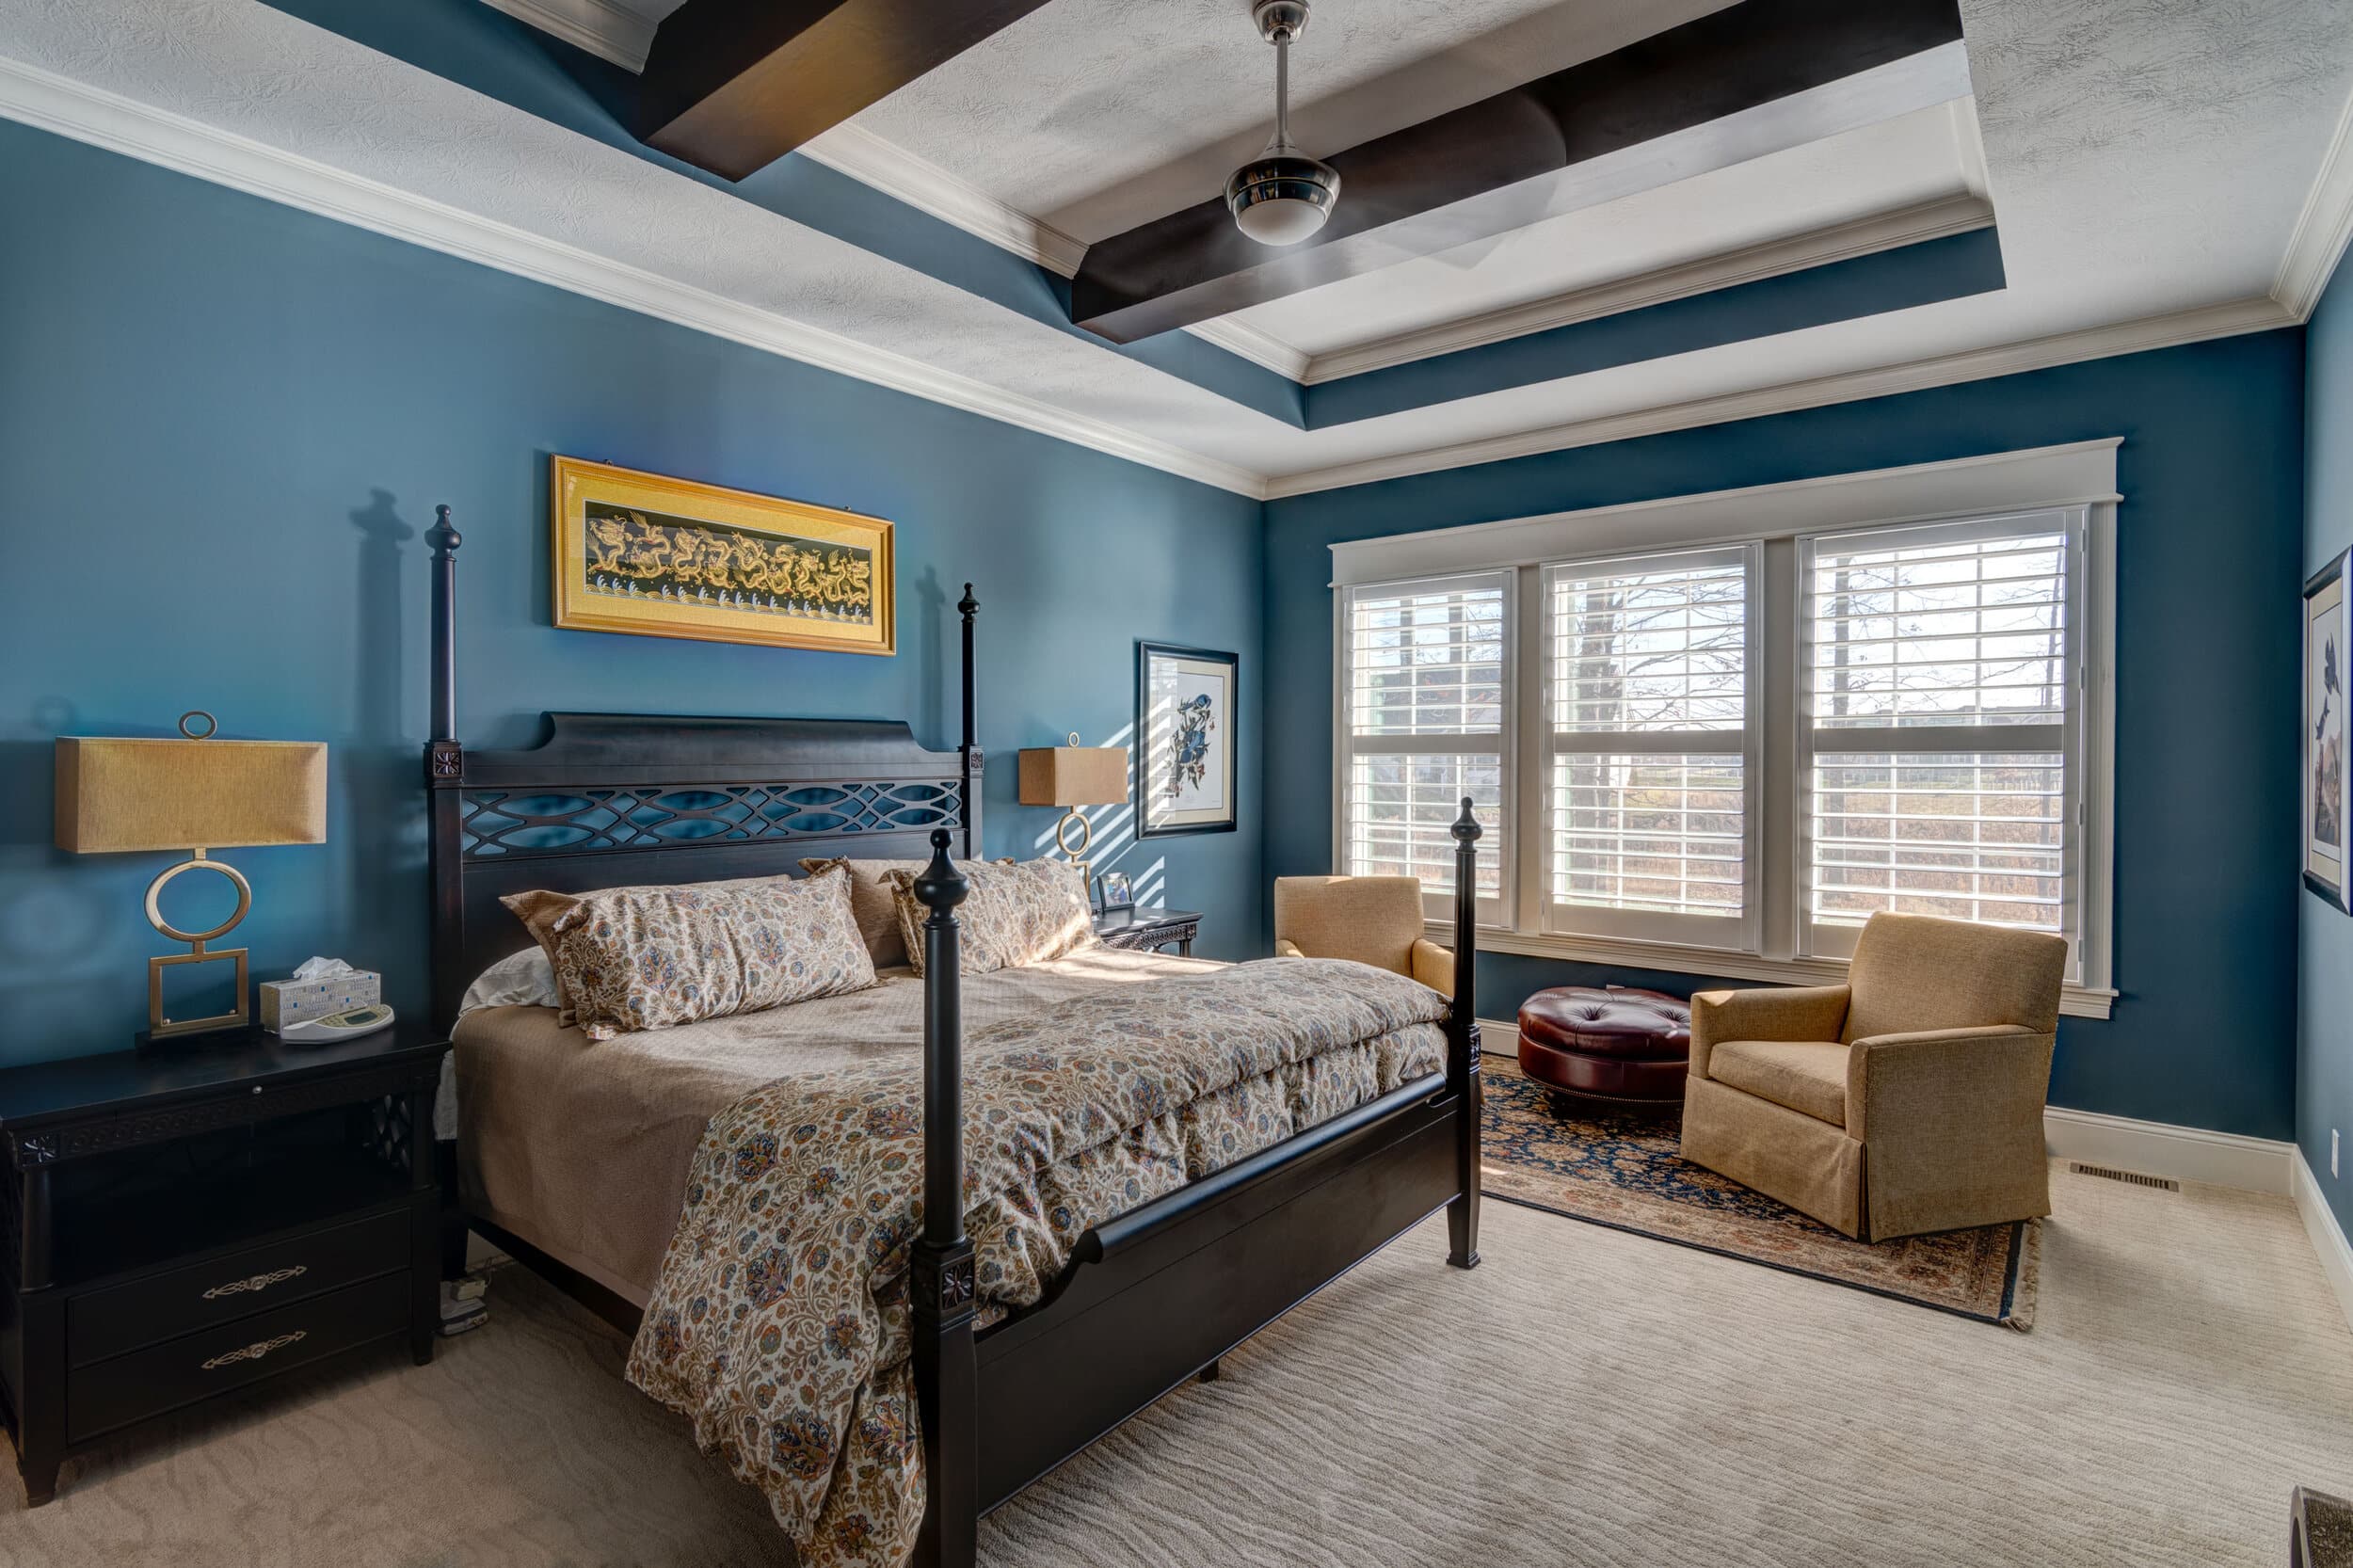 A bedroom with blue walls and a bed, built by a Custom Home Builder Fishers Indiana.